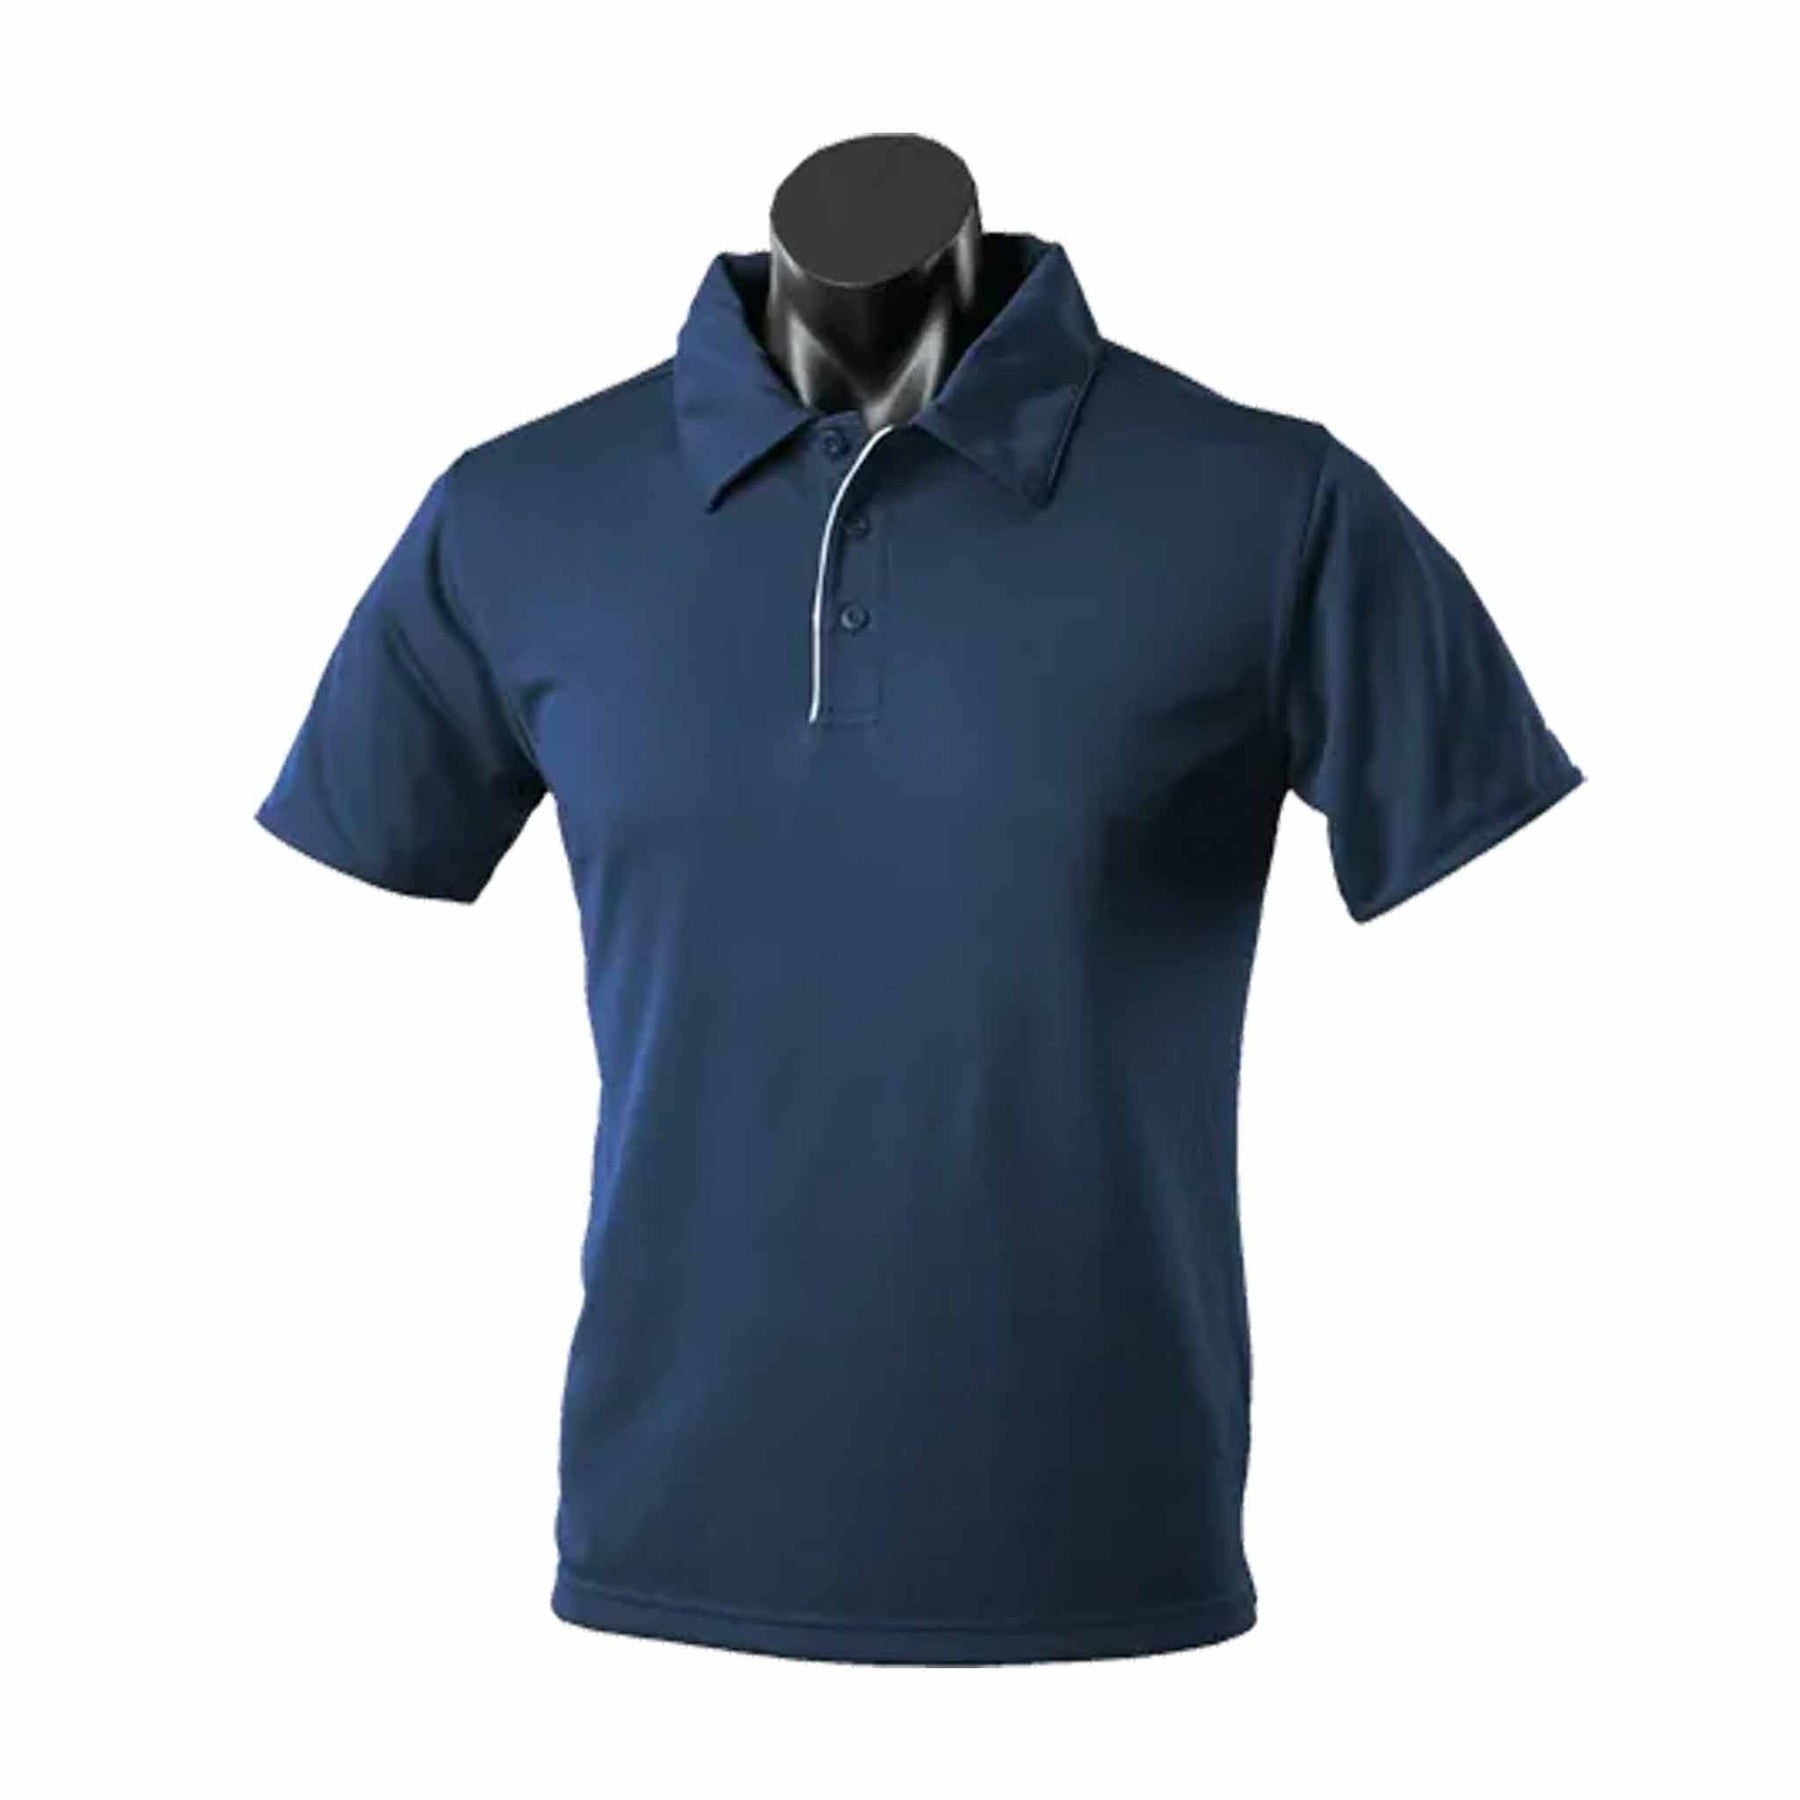 aussie pacific yarra mens polo in navy white